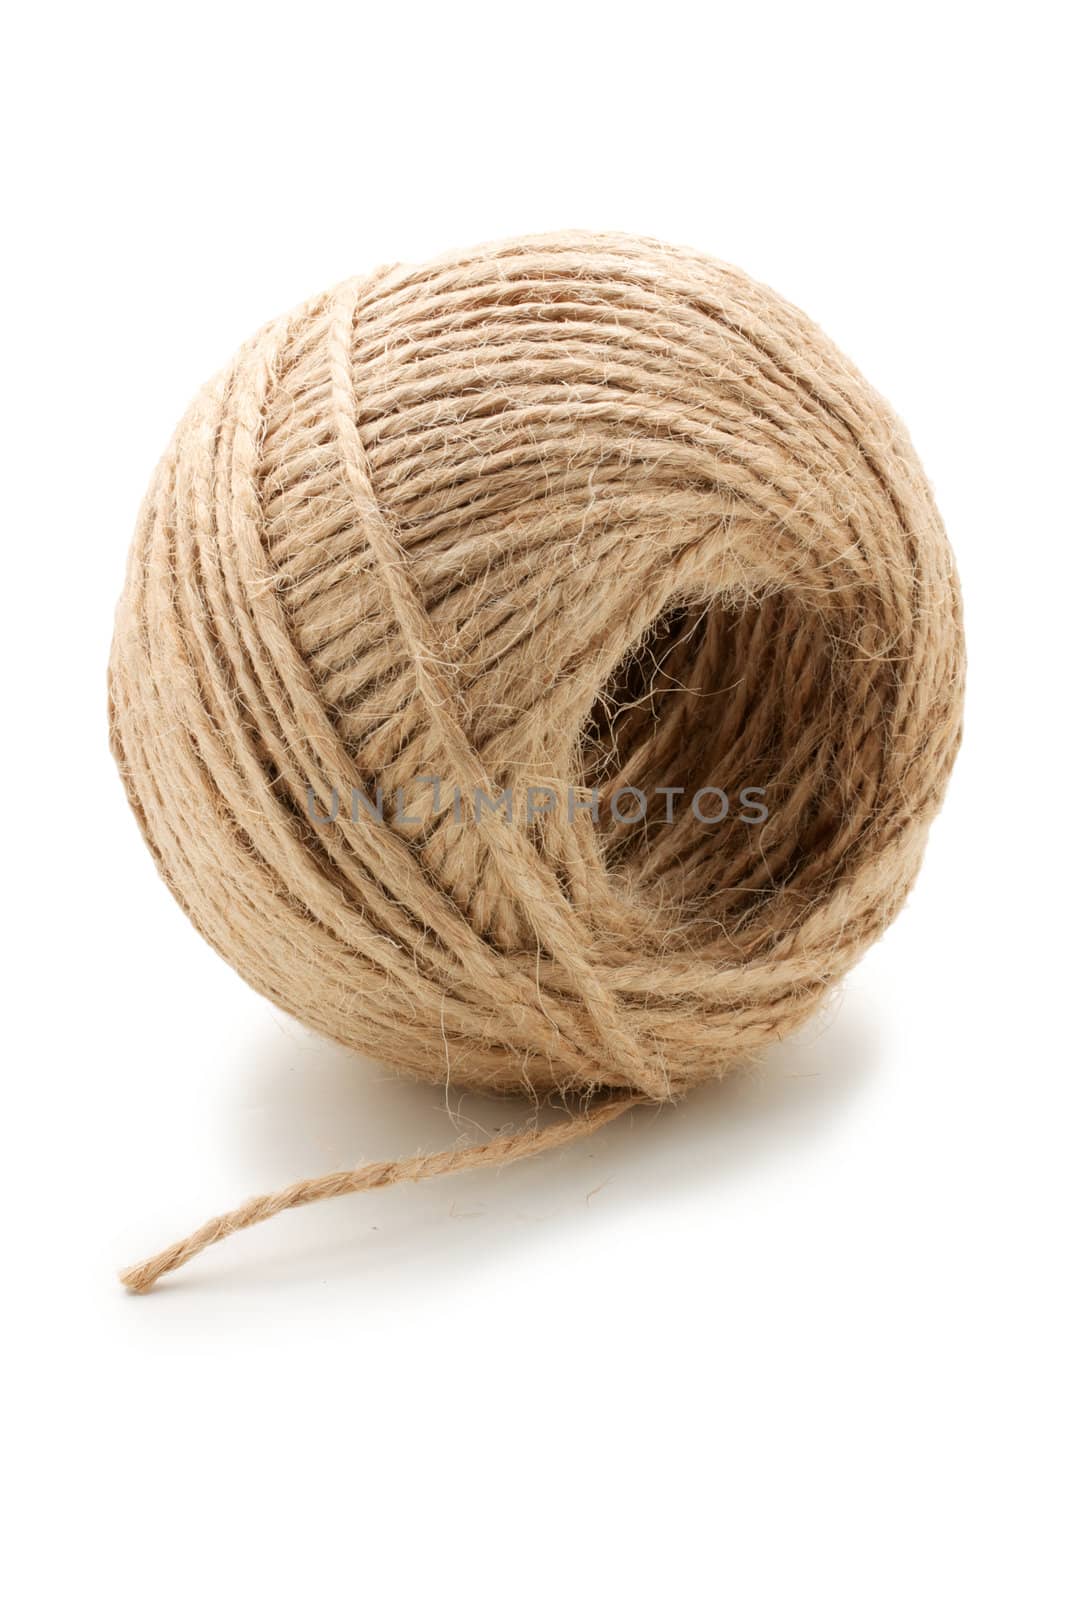 Hank natural twine. Hank is on the side and end of string is separately. On a white background.